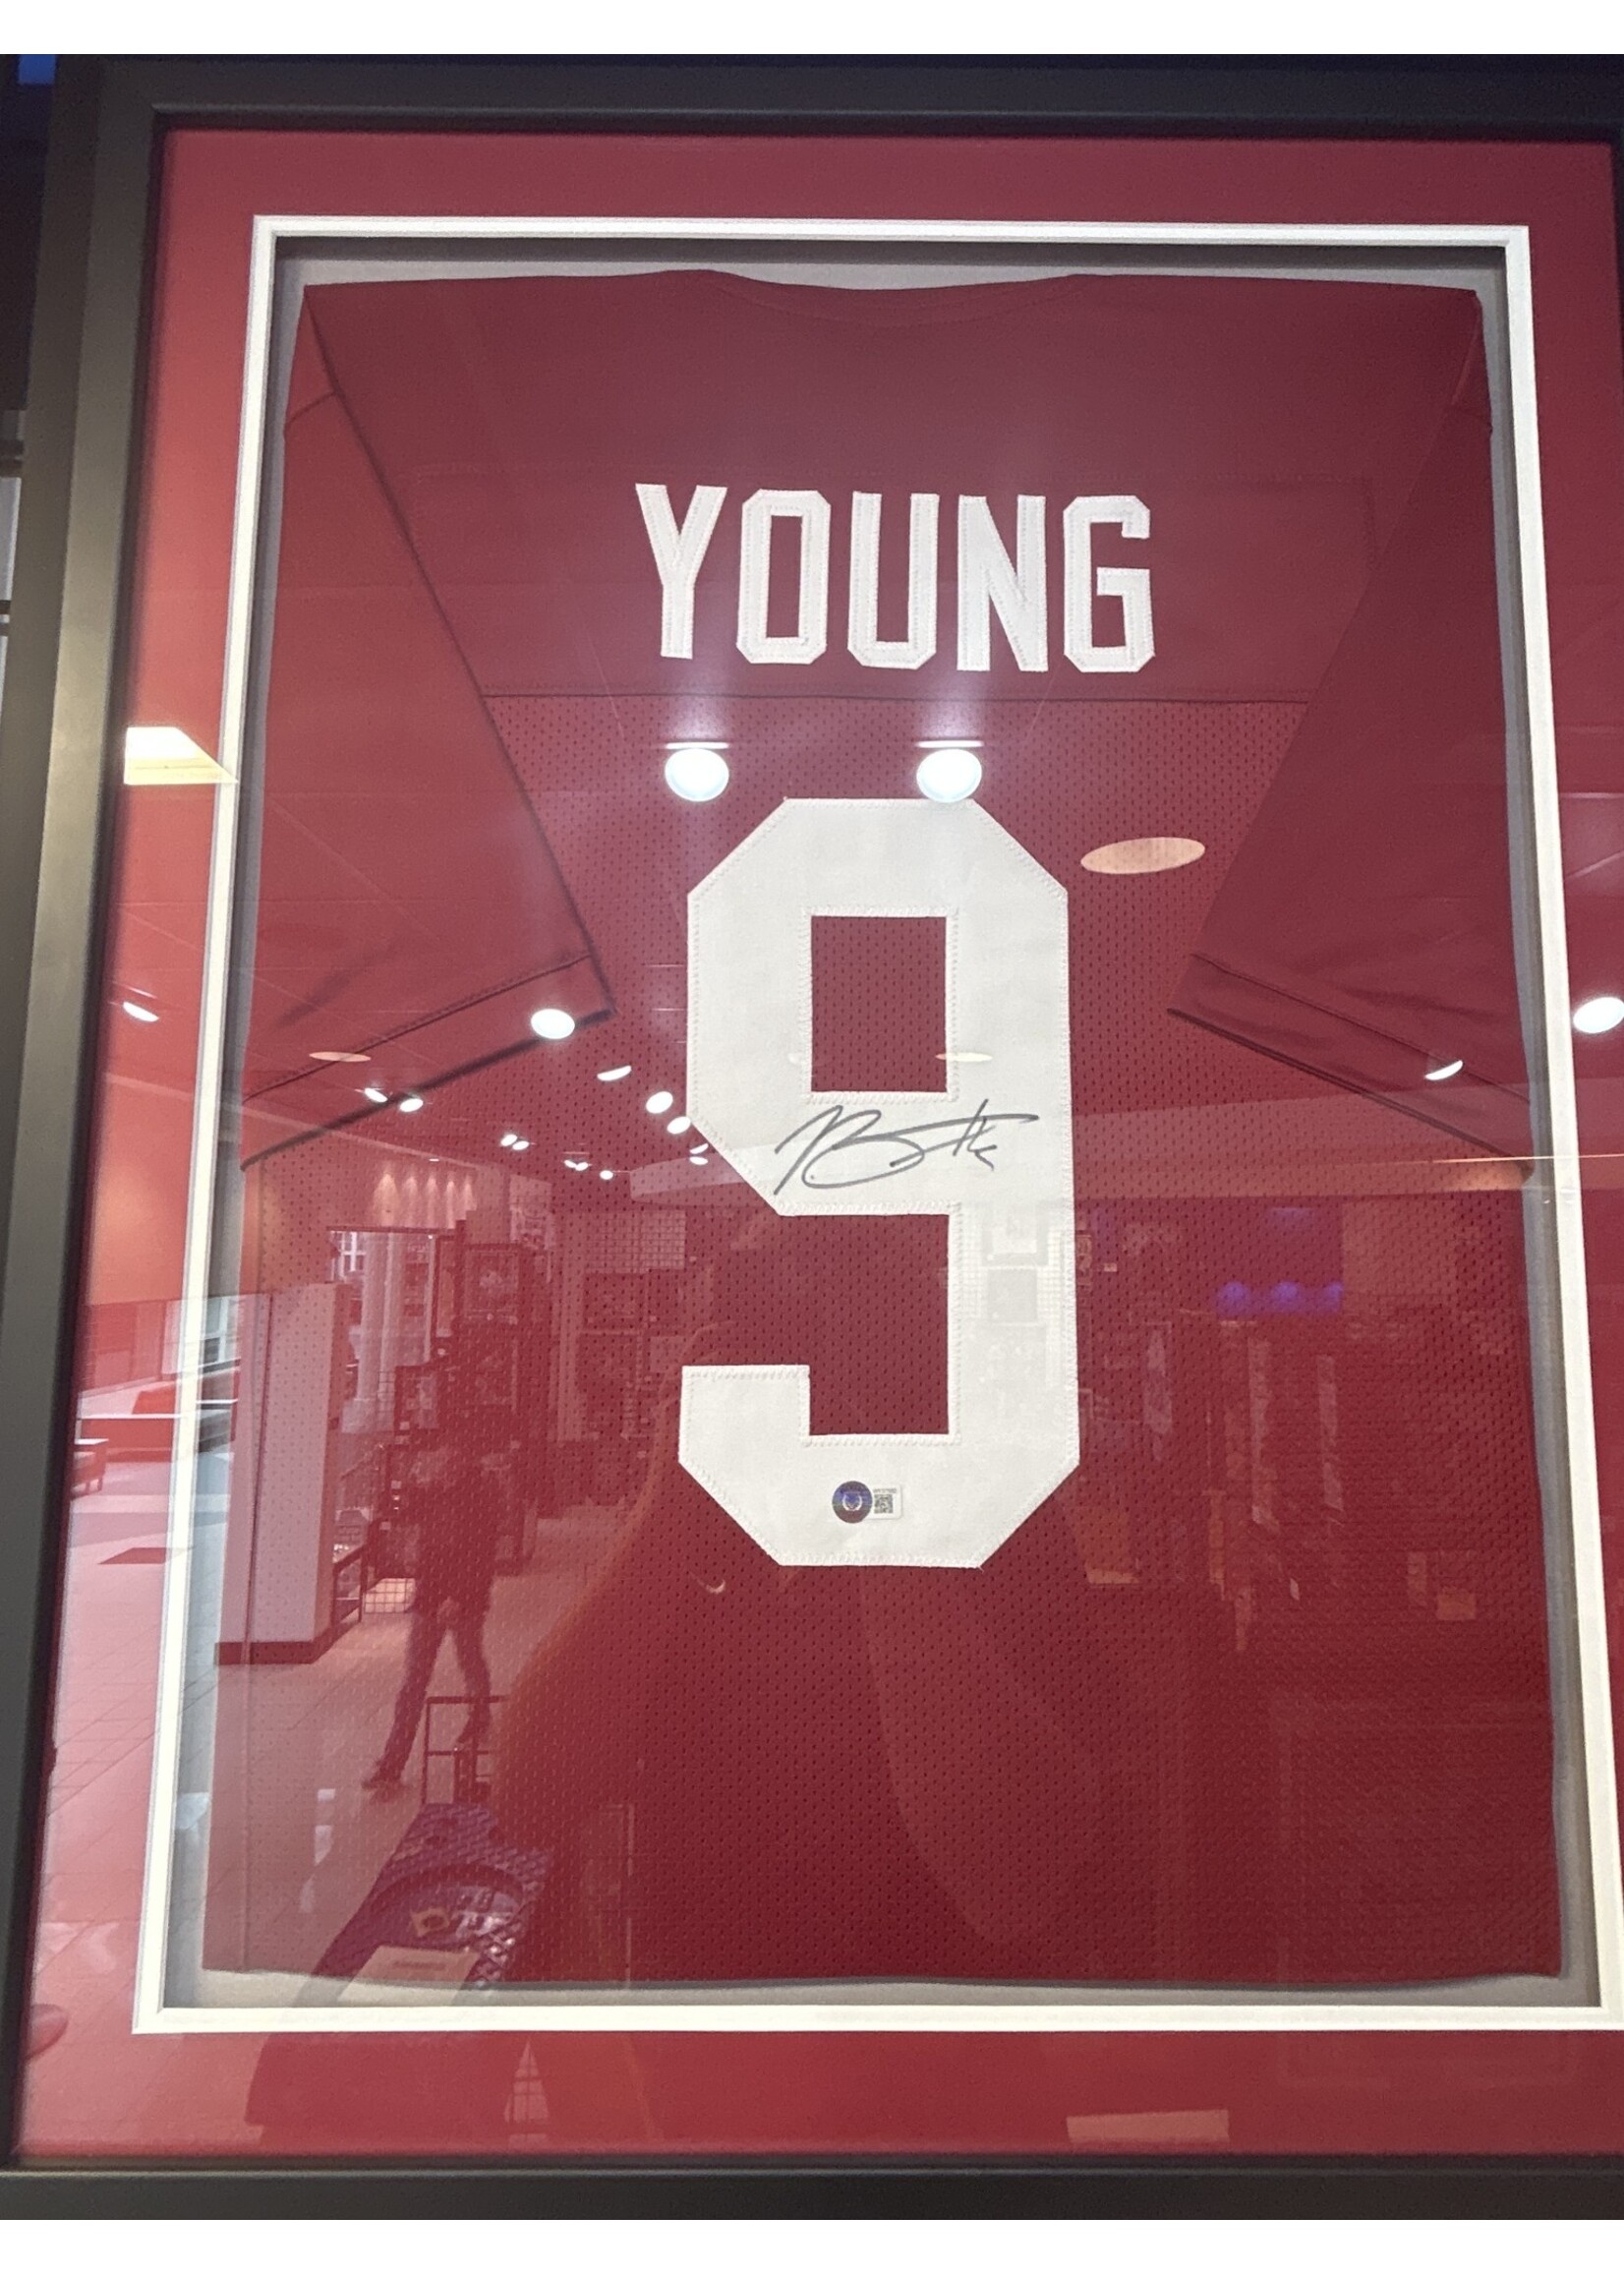 Bryce Young F Jersey